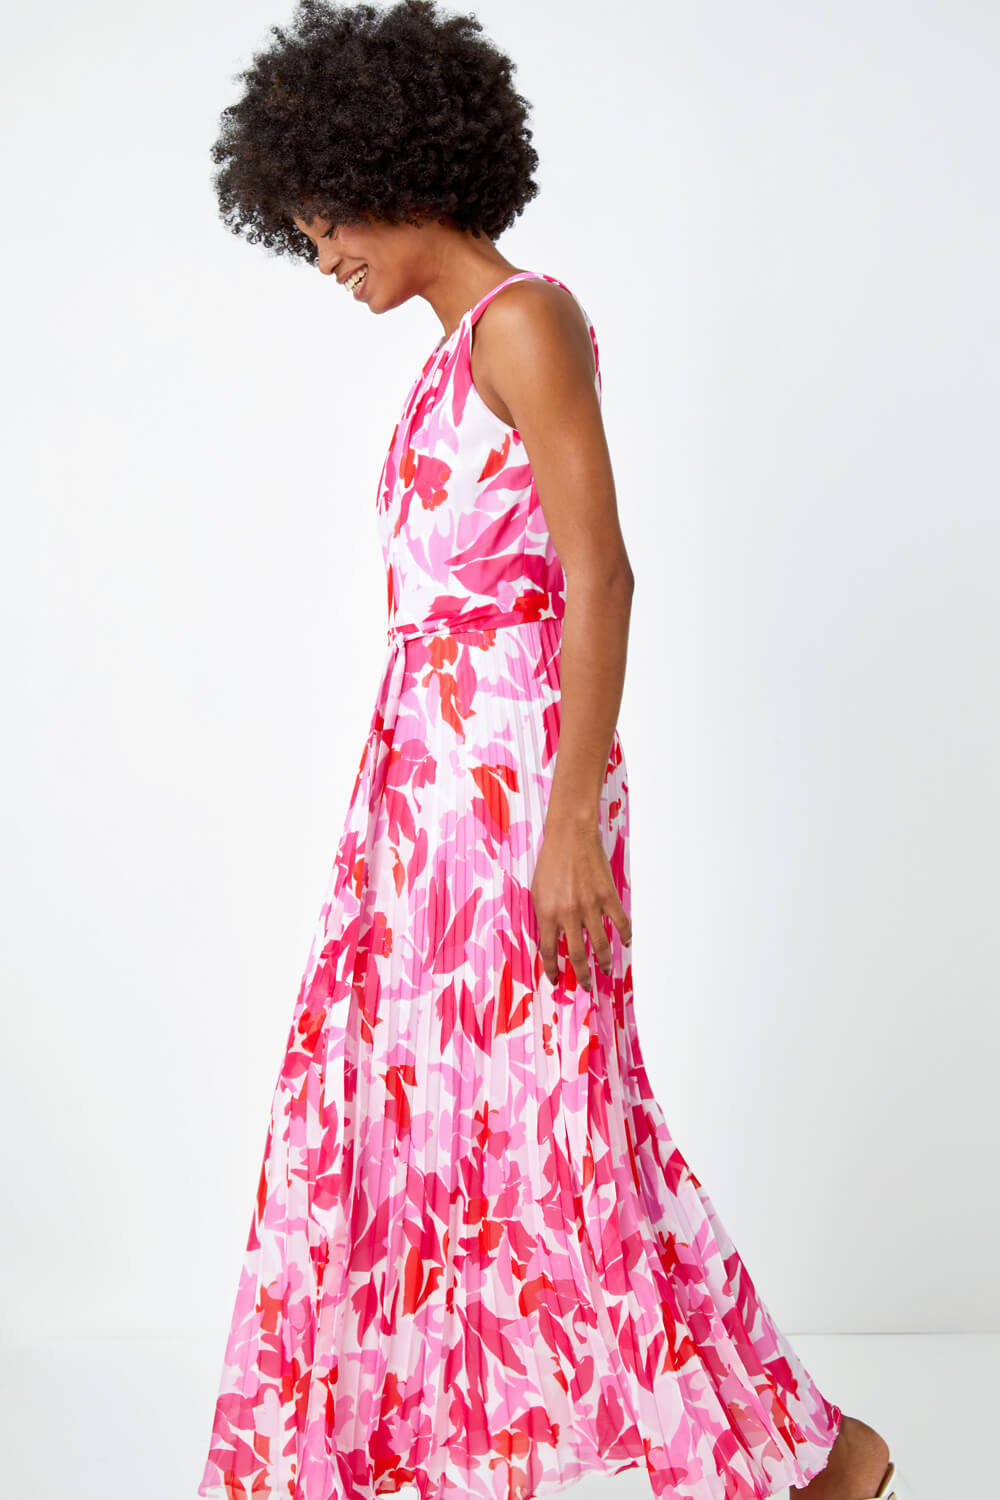 PINK Floral Pleated Halter Neck Maxi Dress, Image 2 of 5